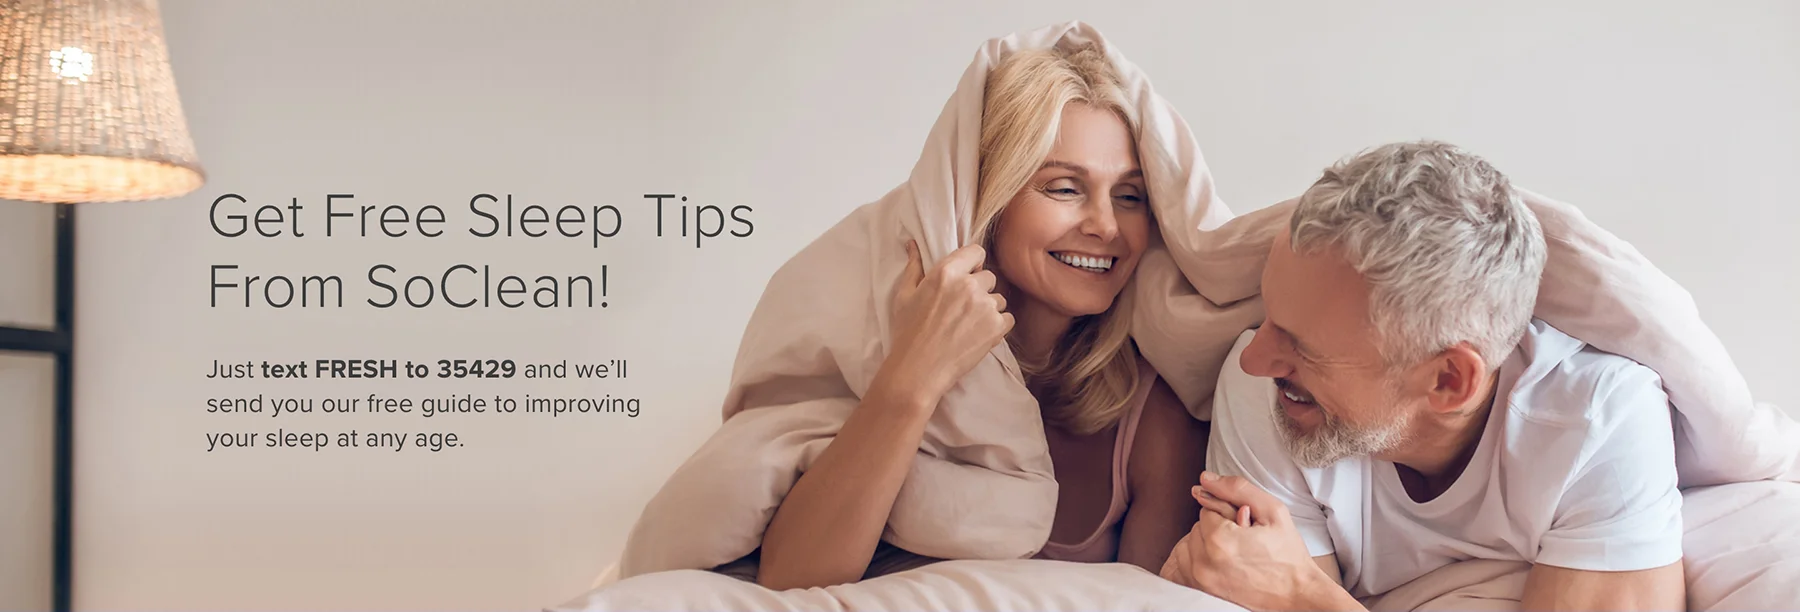 Get Free Sleep Tips From SoClean!